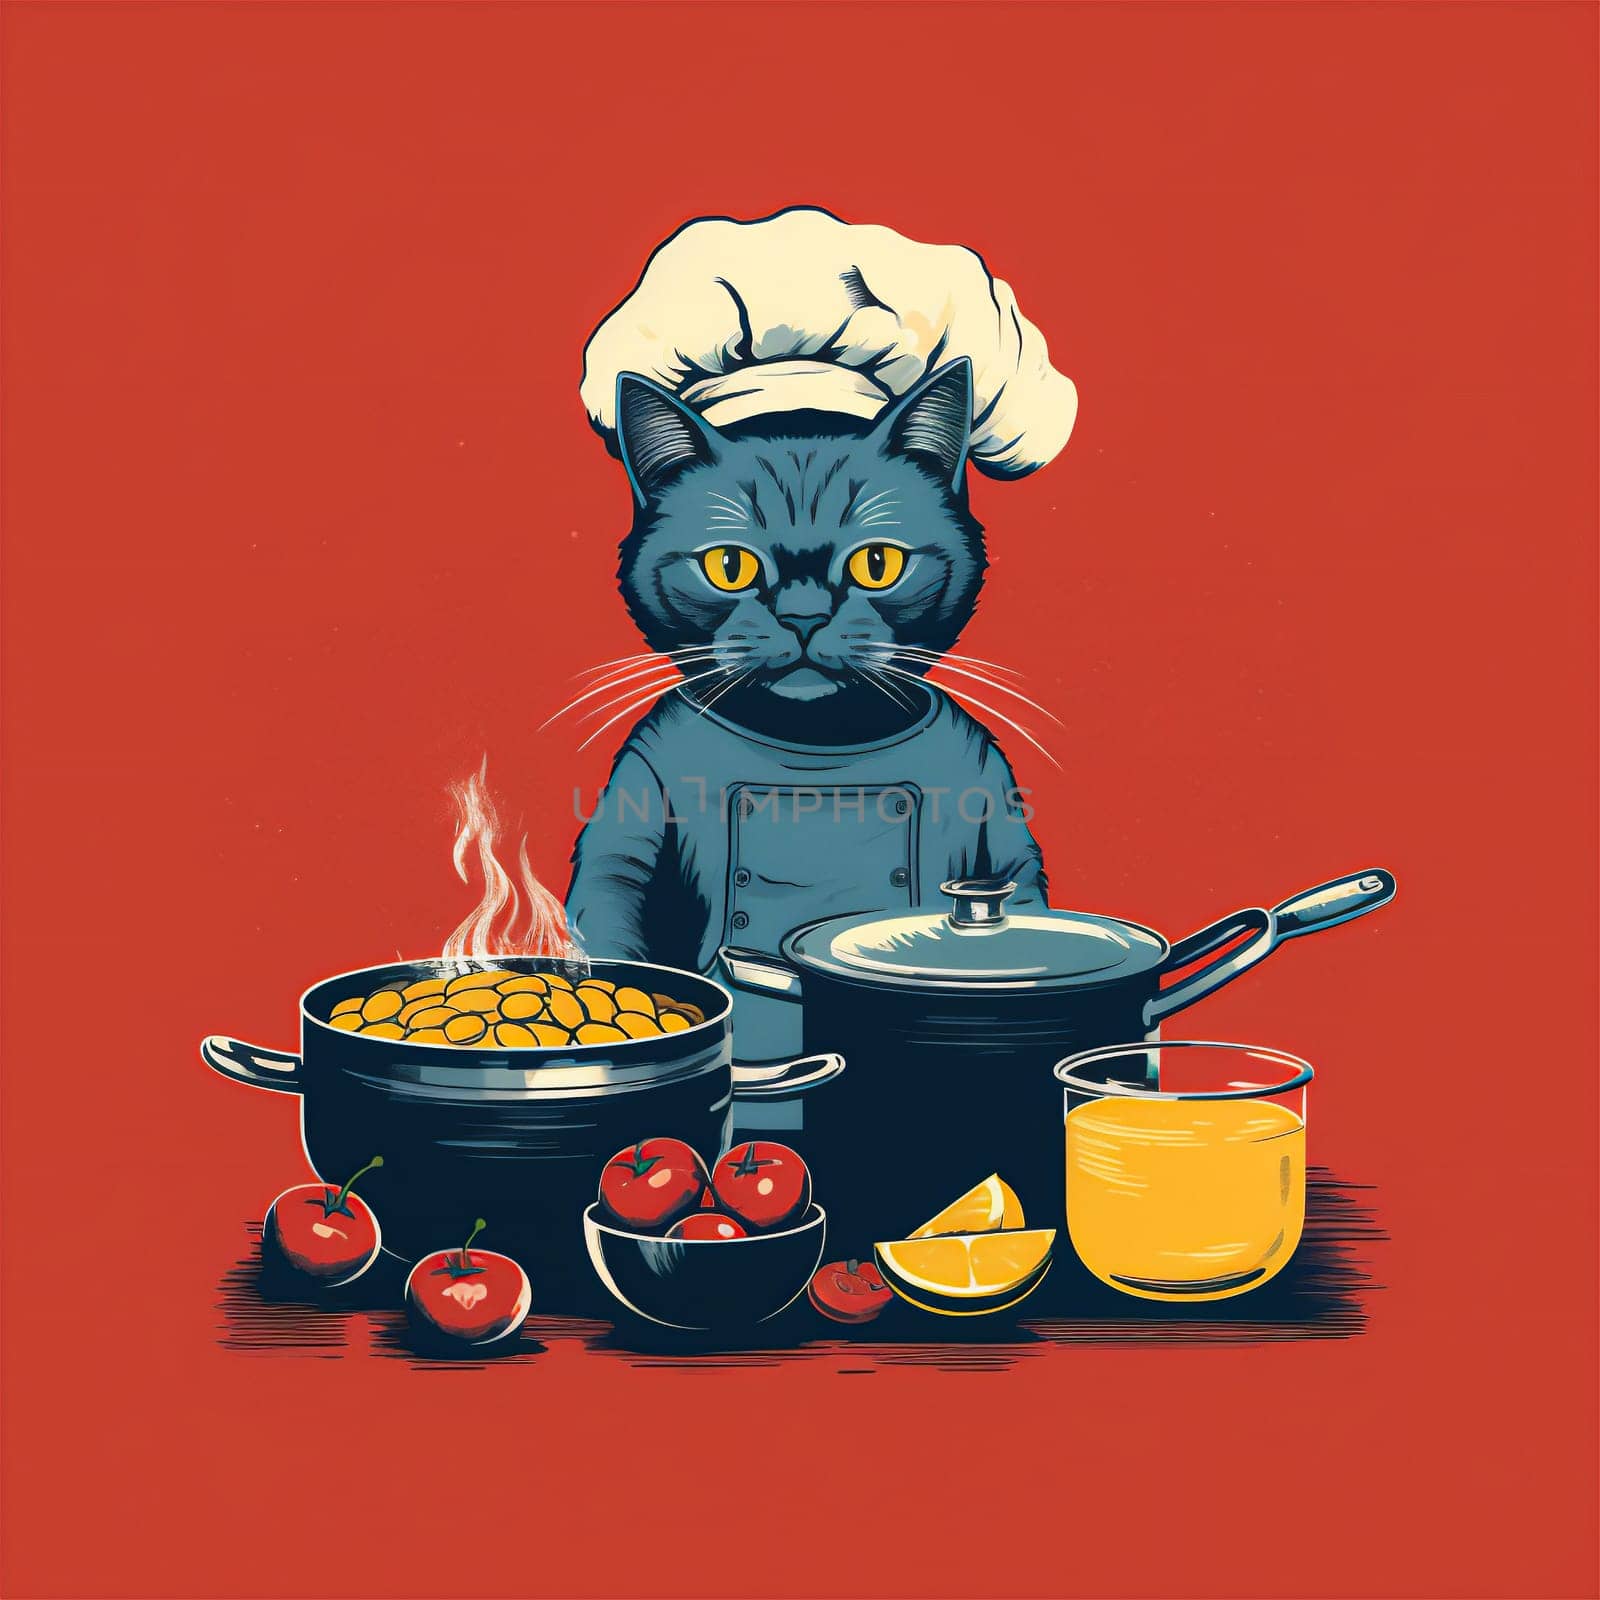 Cute and funny illustration of a cat cooking in a kitchen. The puss is wearing a white chef hat and apron over red background